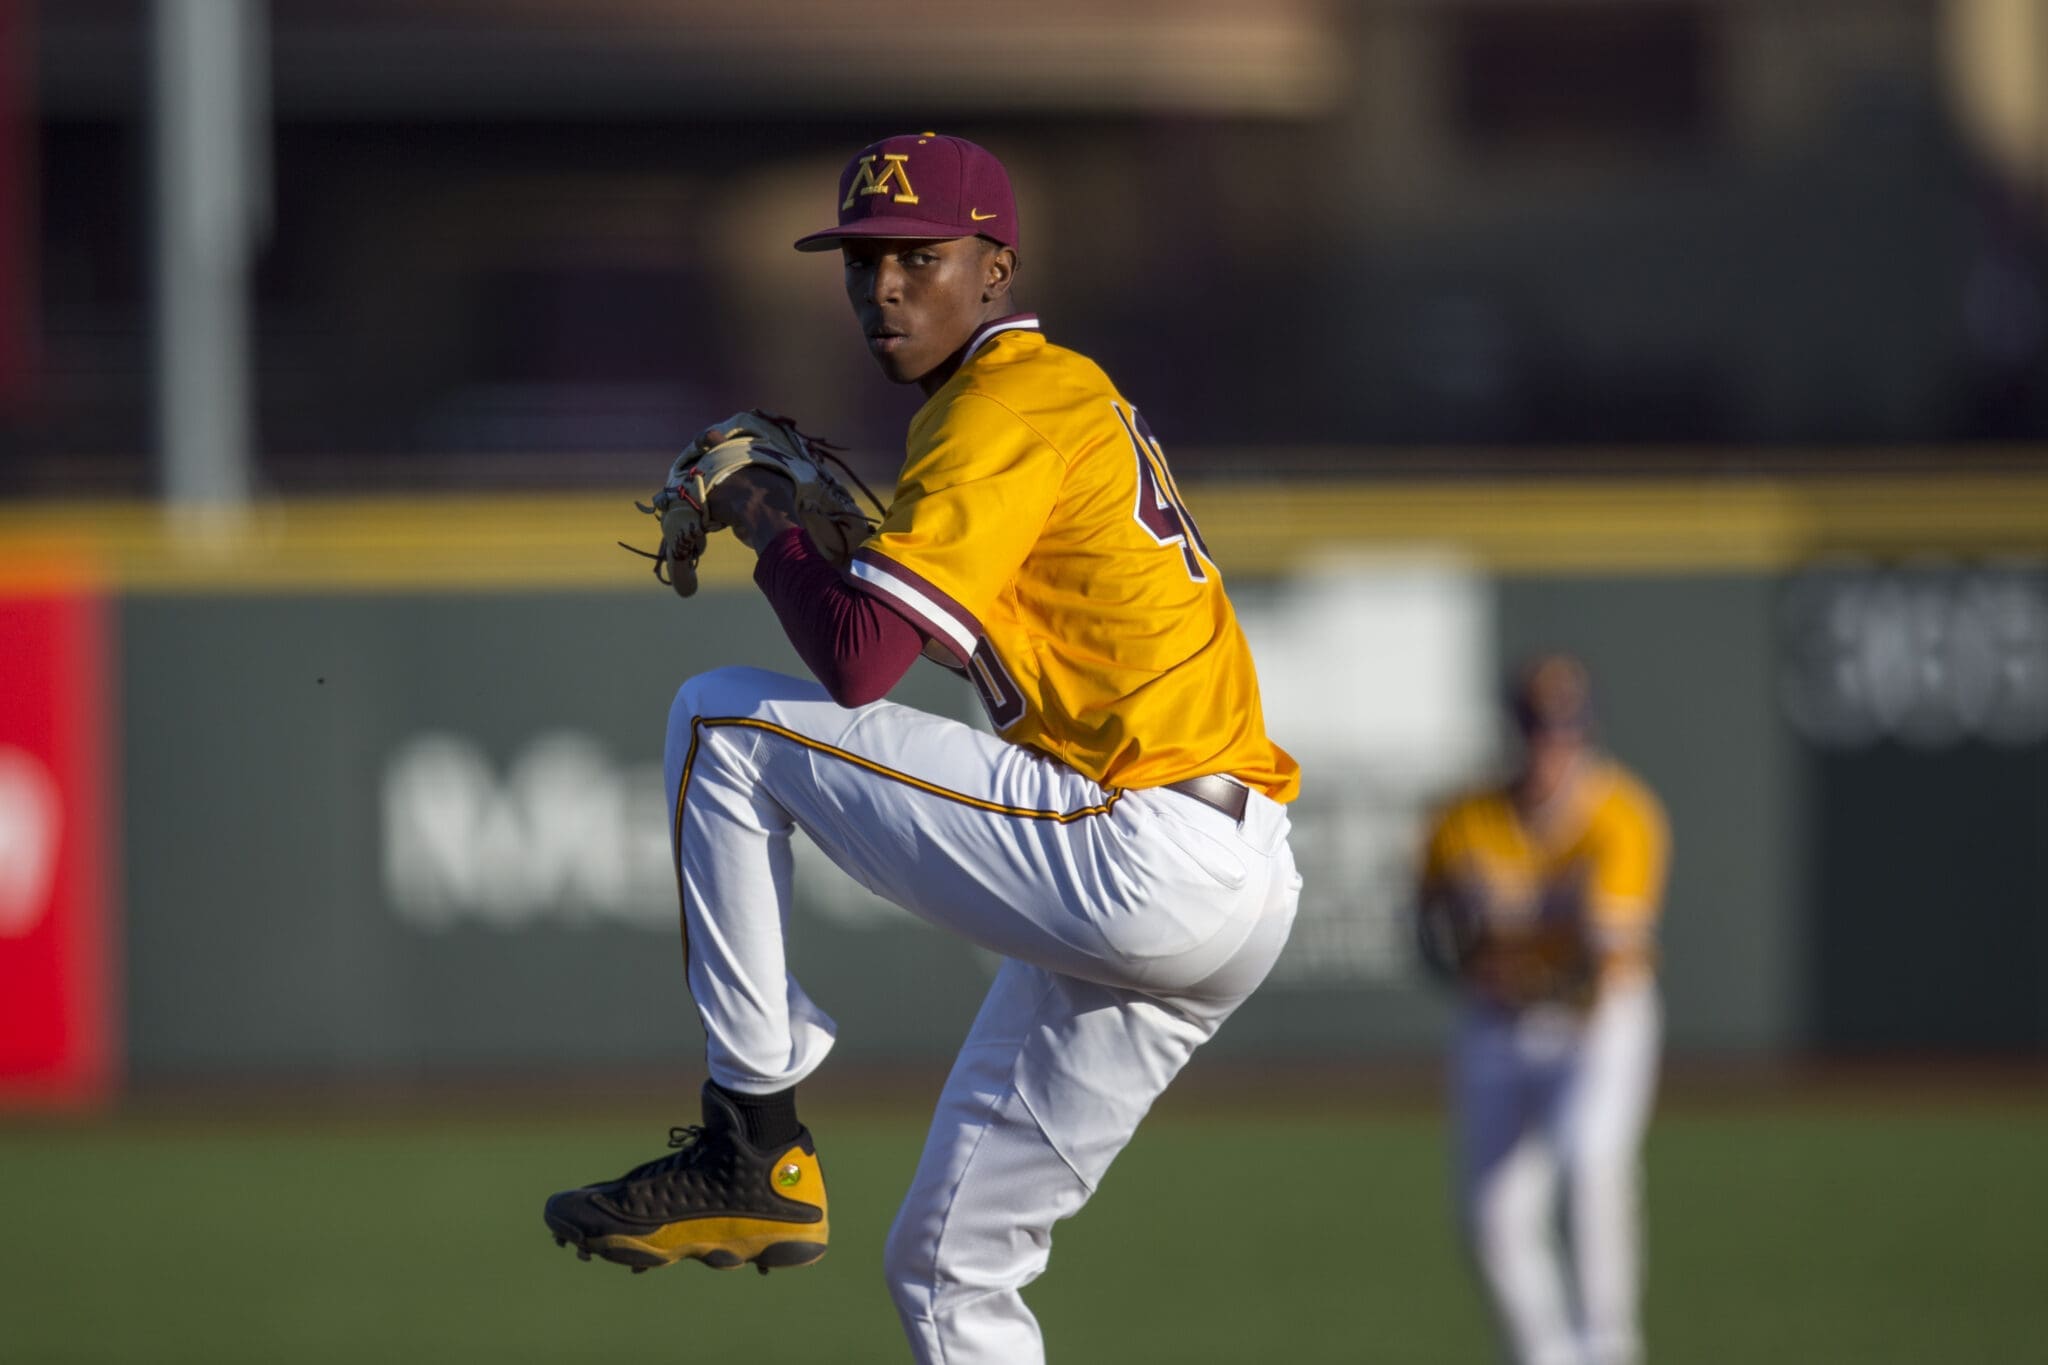 Pirates right-handed pitcher J.P. Massey takes the mound as a member of the Minnesota Golden Gophers.